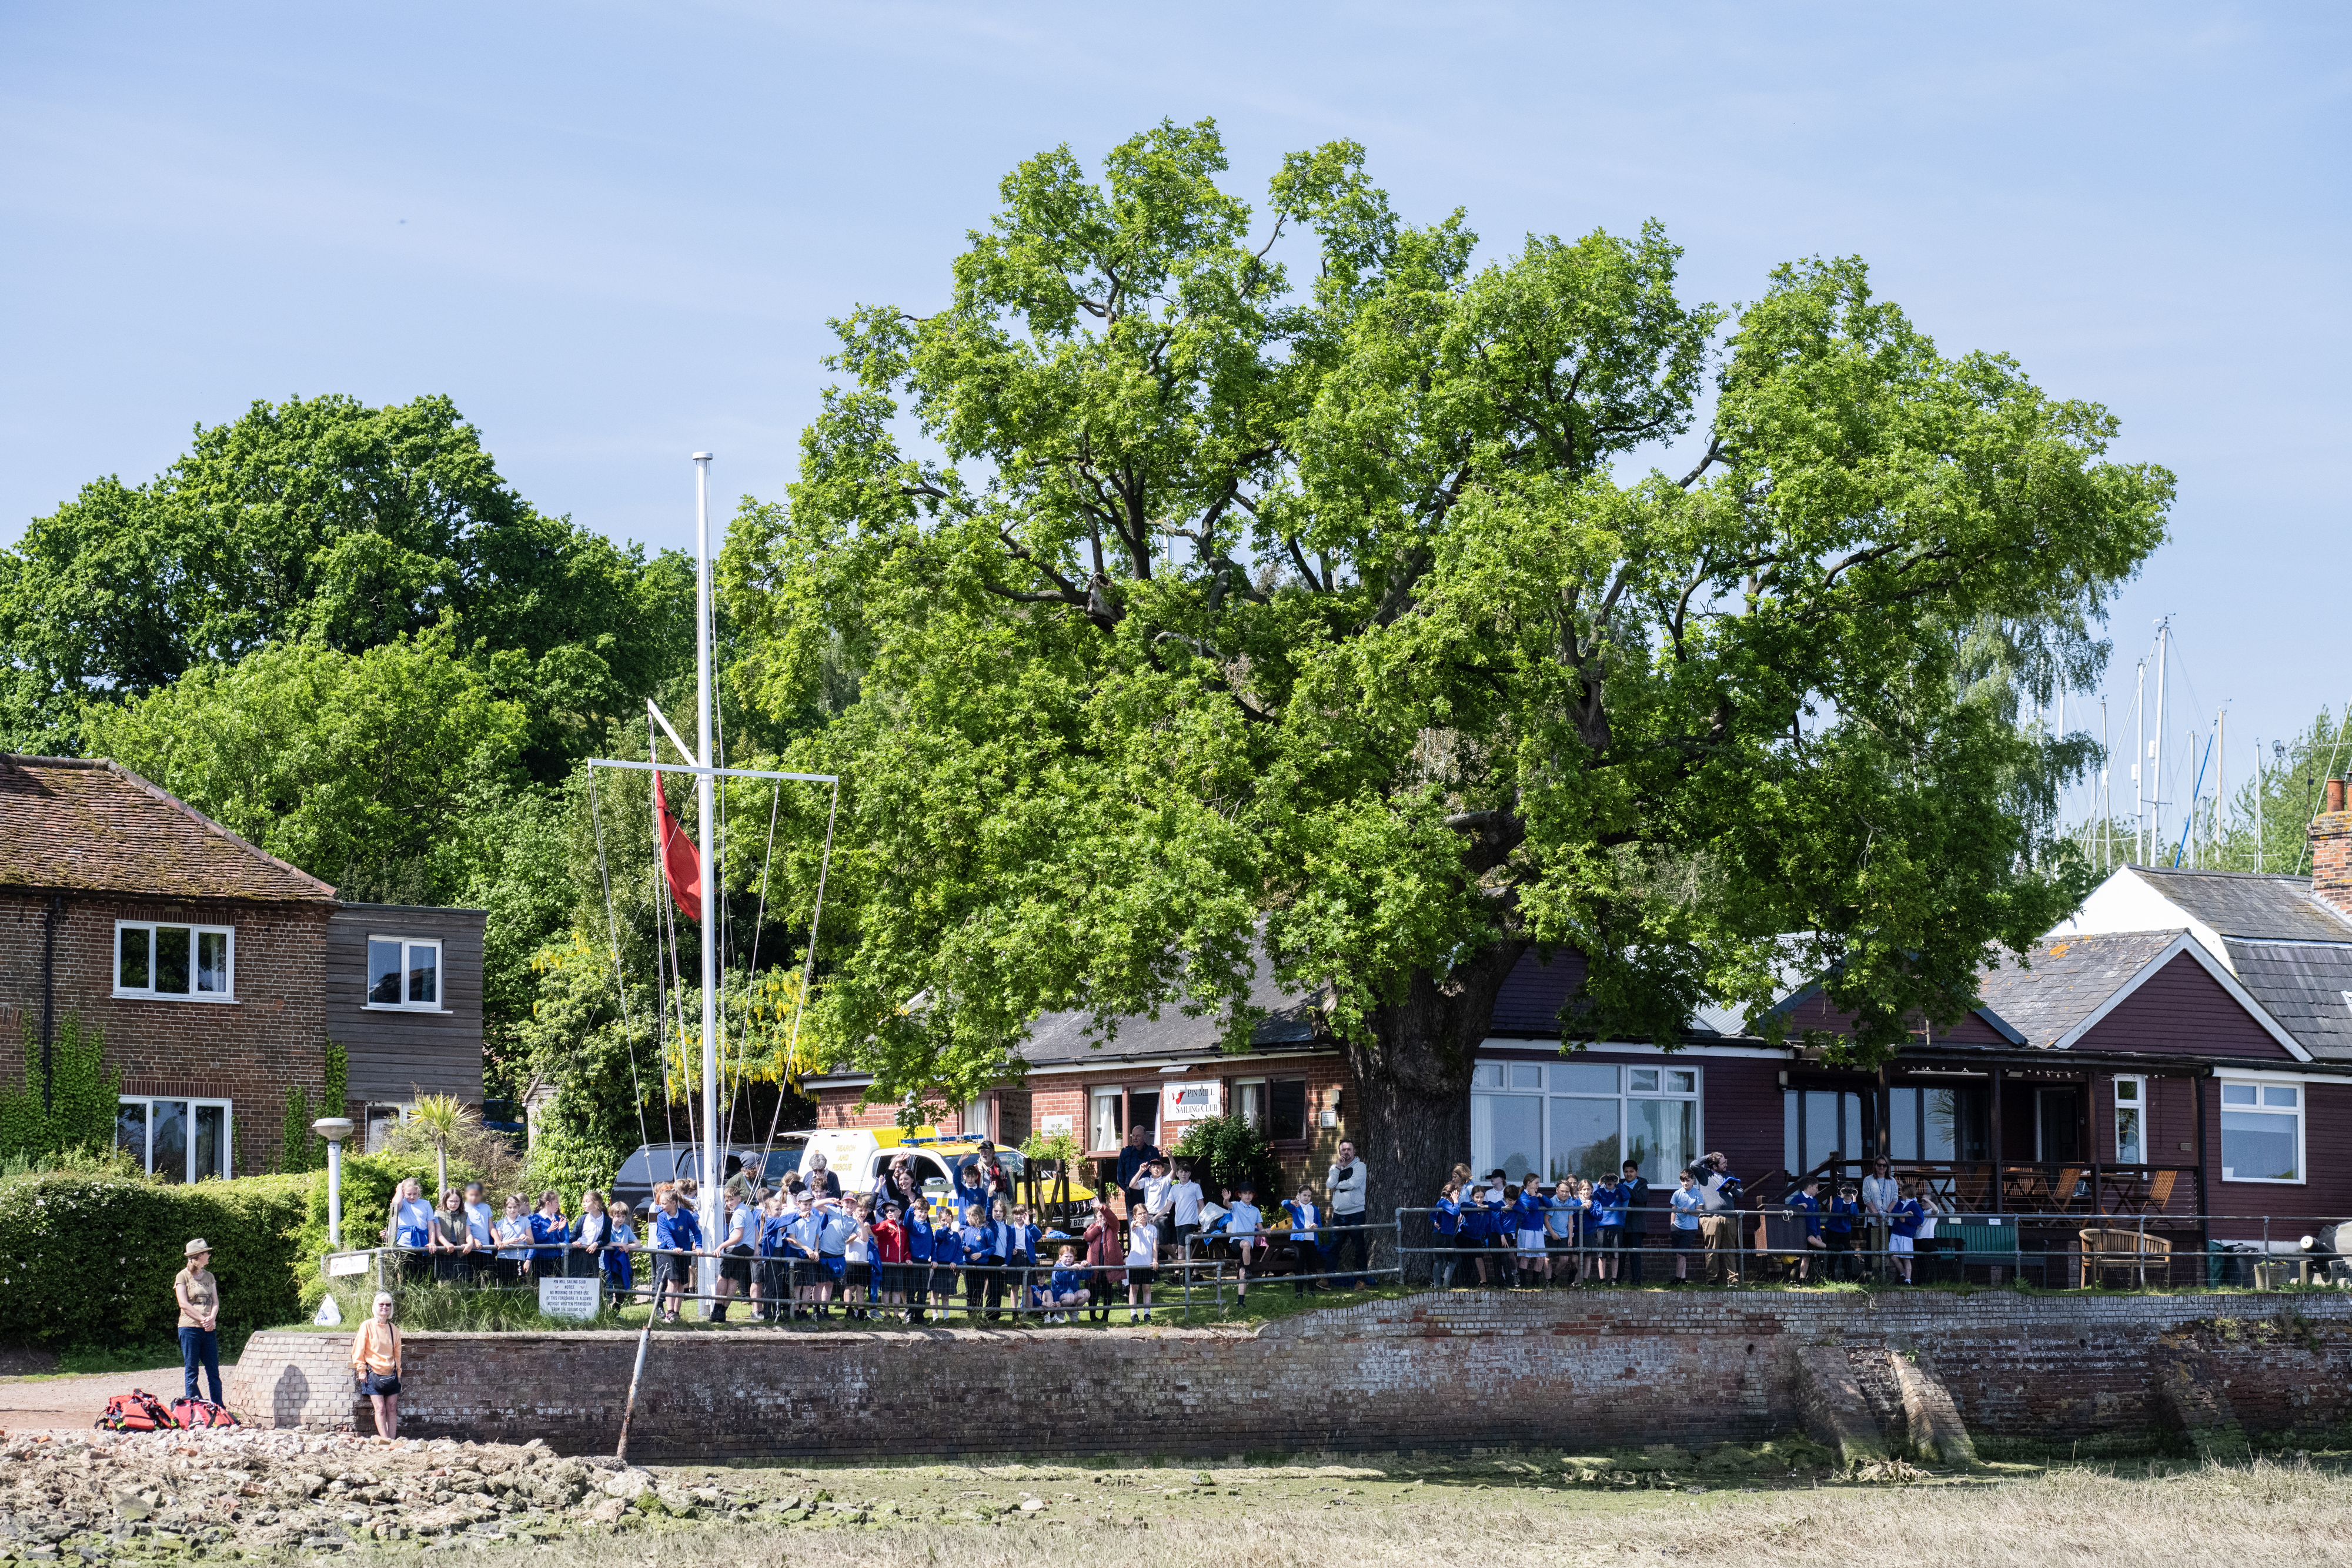 Children waiting at Pin Mill